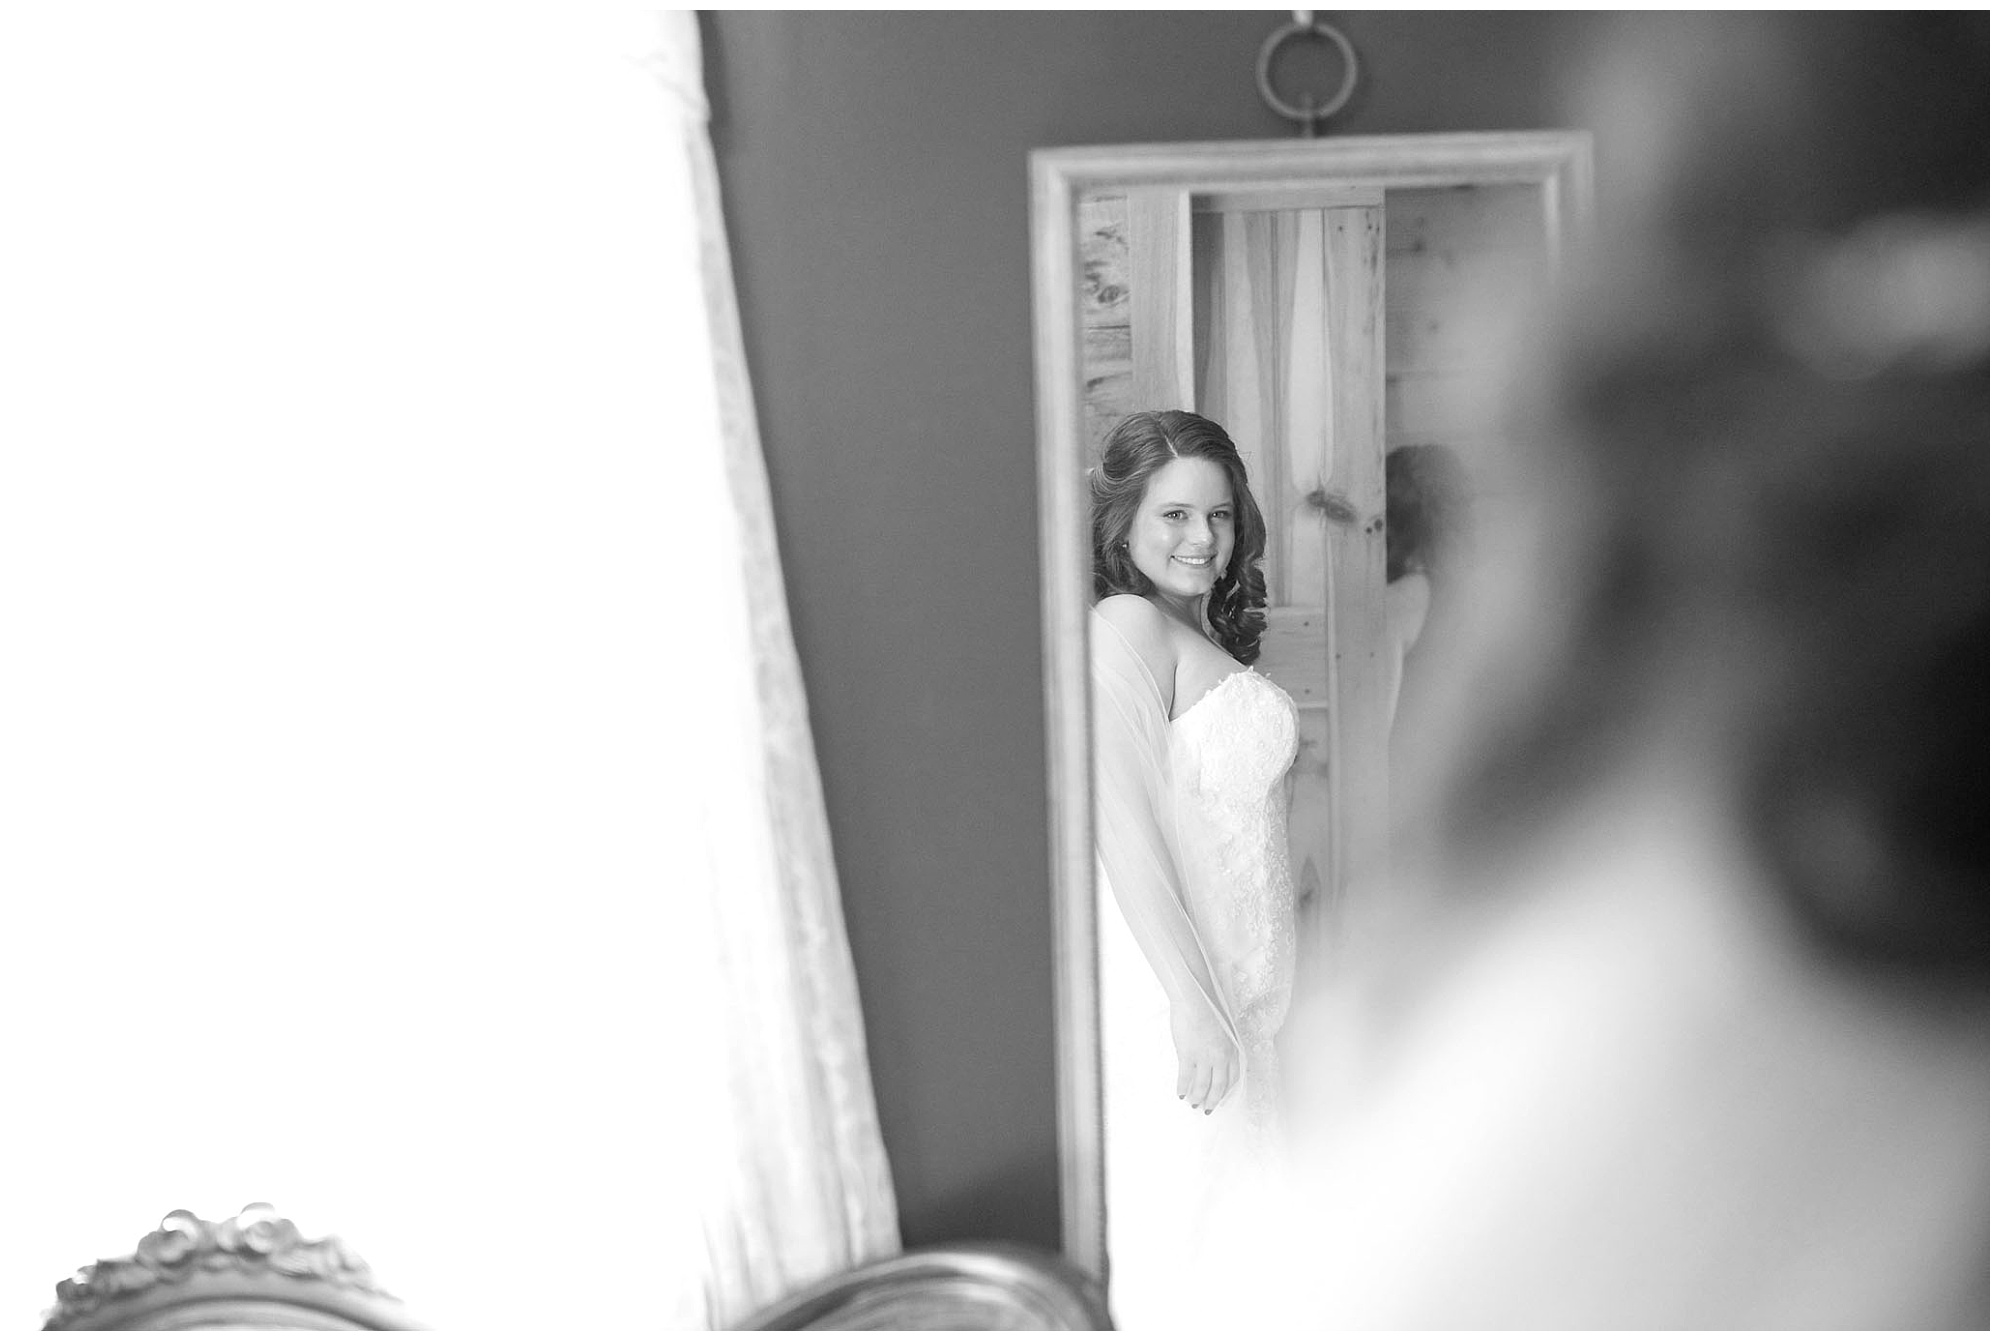 A lovely bride giving herself a smiling once over in her fully doned wedding dreess while looking in a mirror